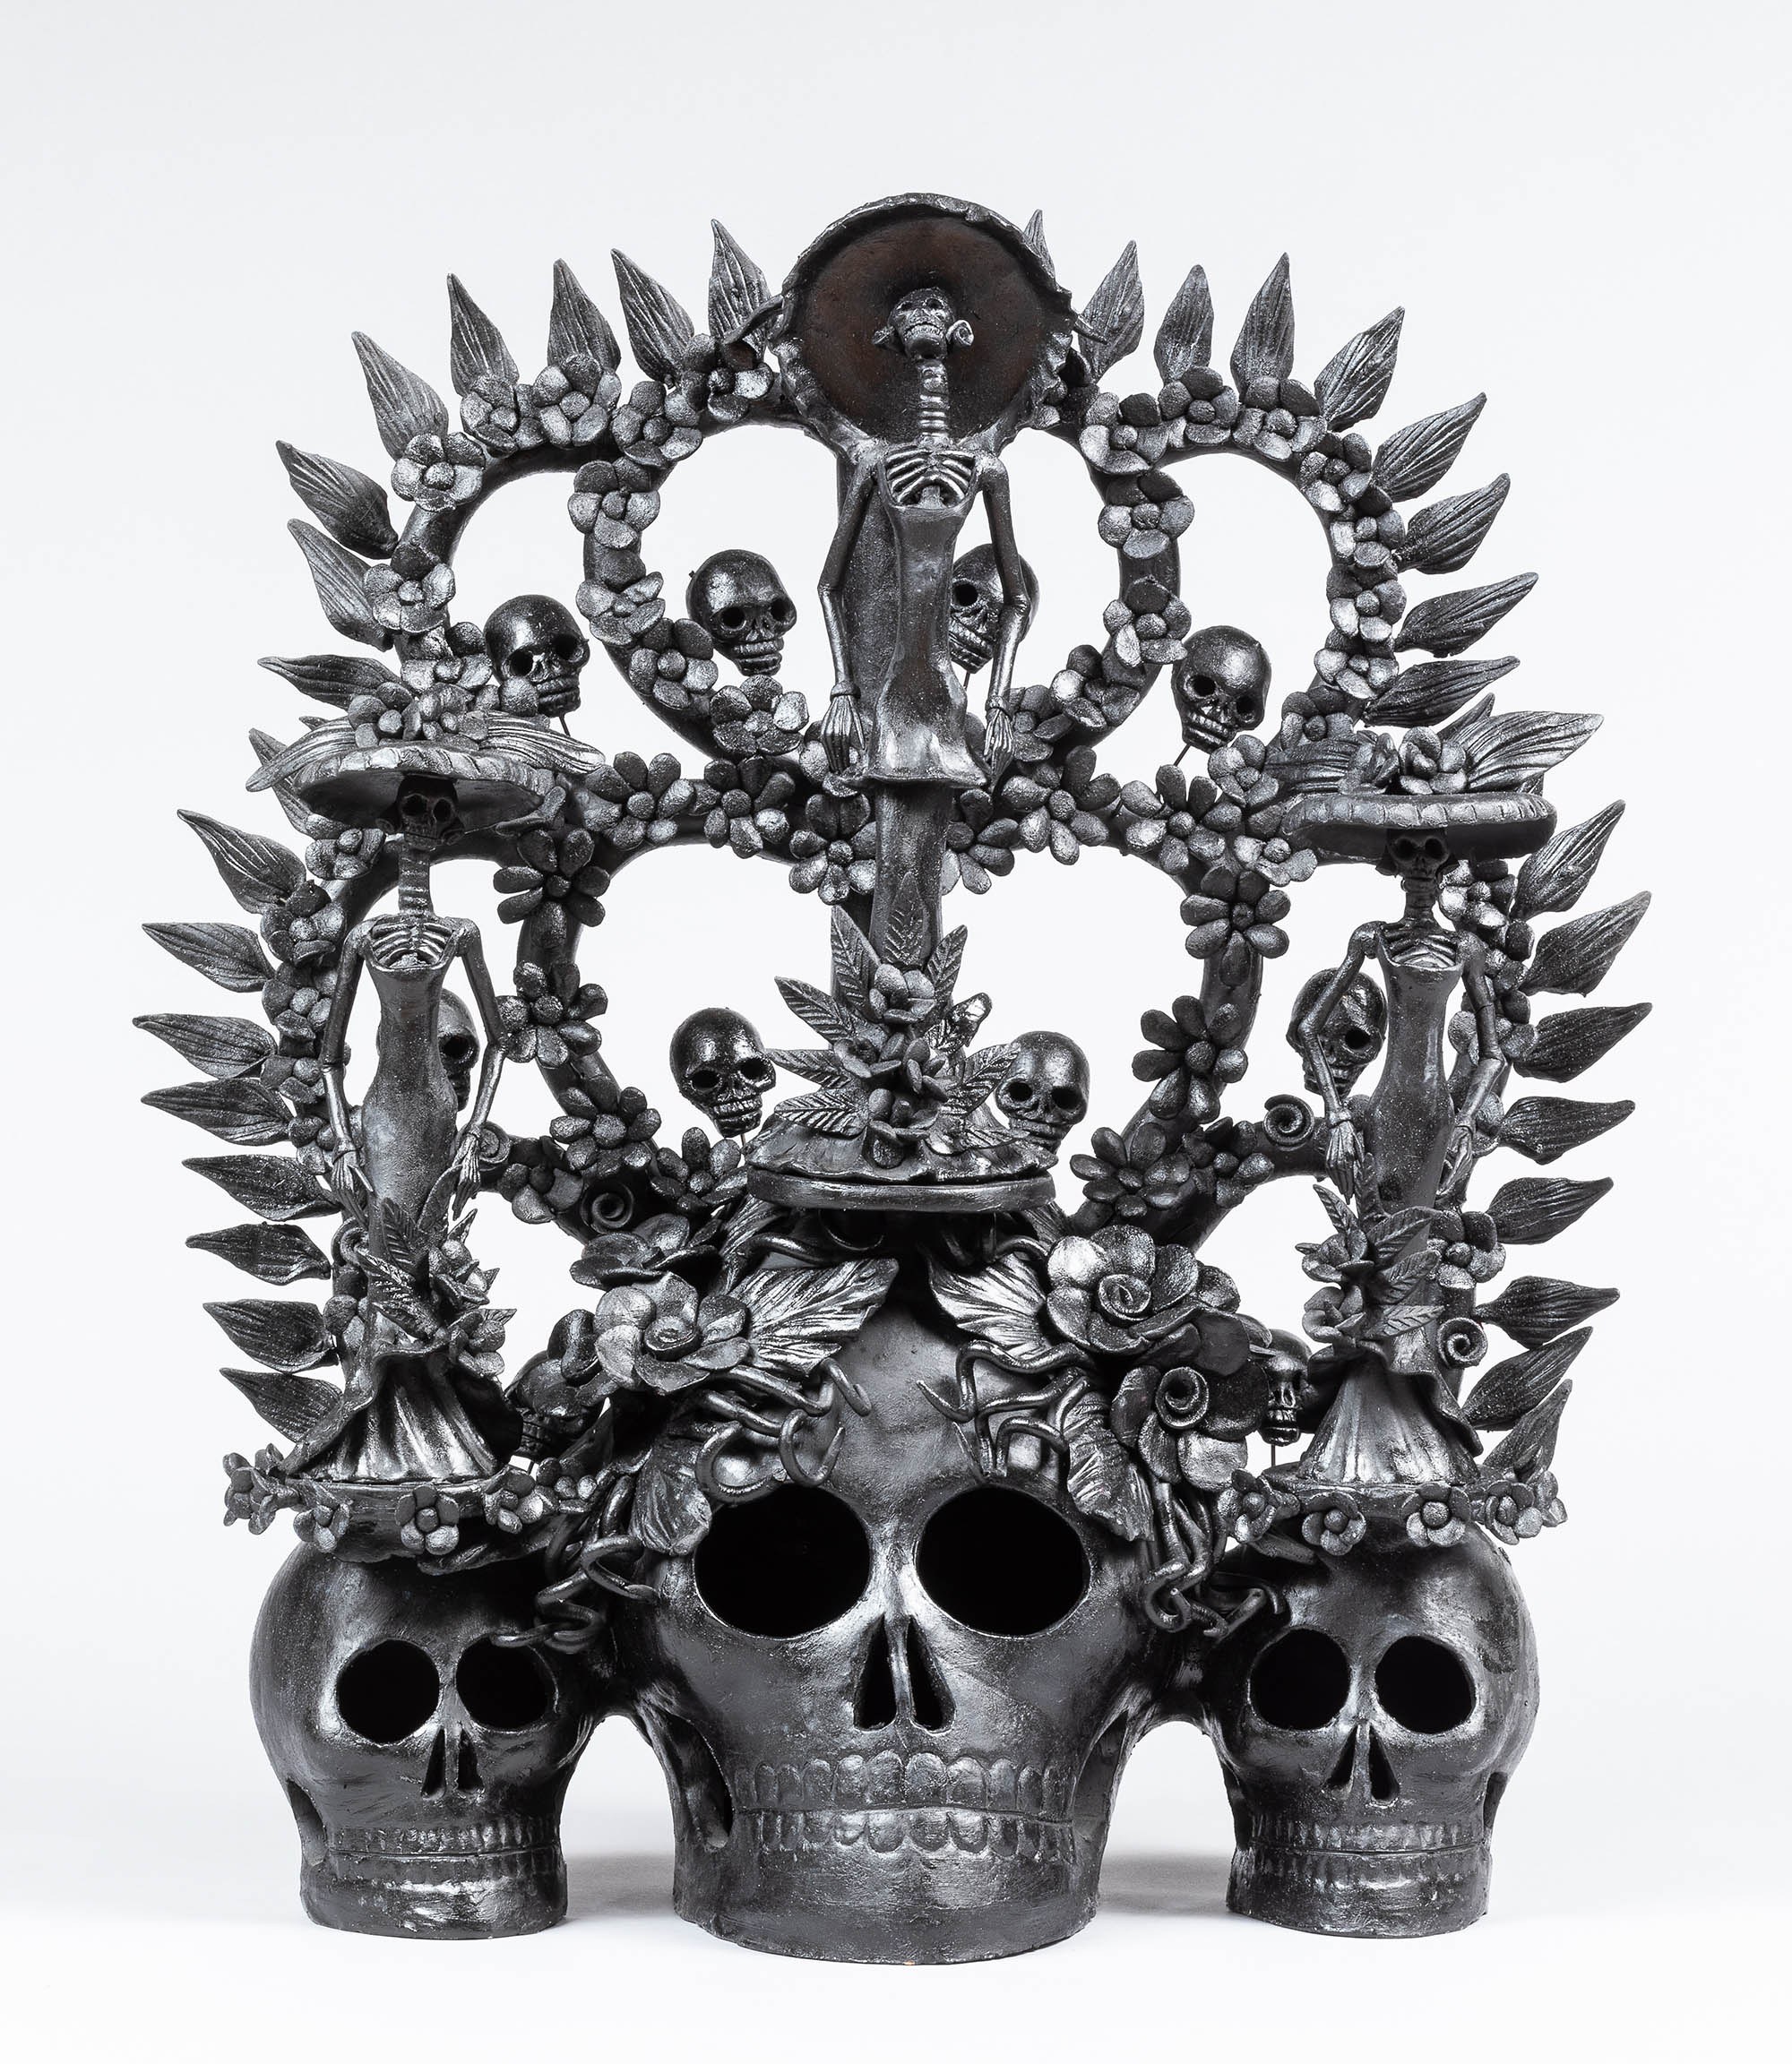 Catrina candelabro (Fancy Lady Candle Holder) by Pedro Hernández, part of this year’s Day of the Dead Exhibit